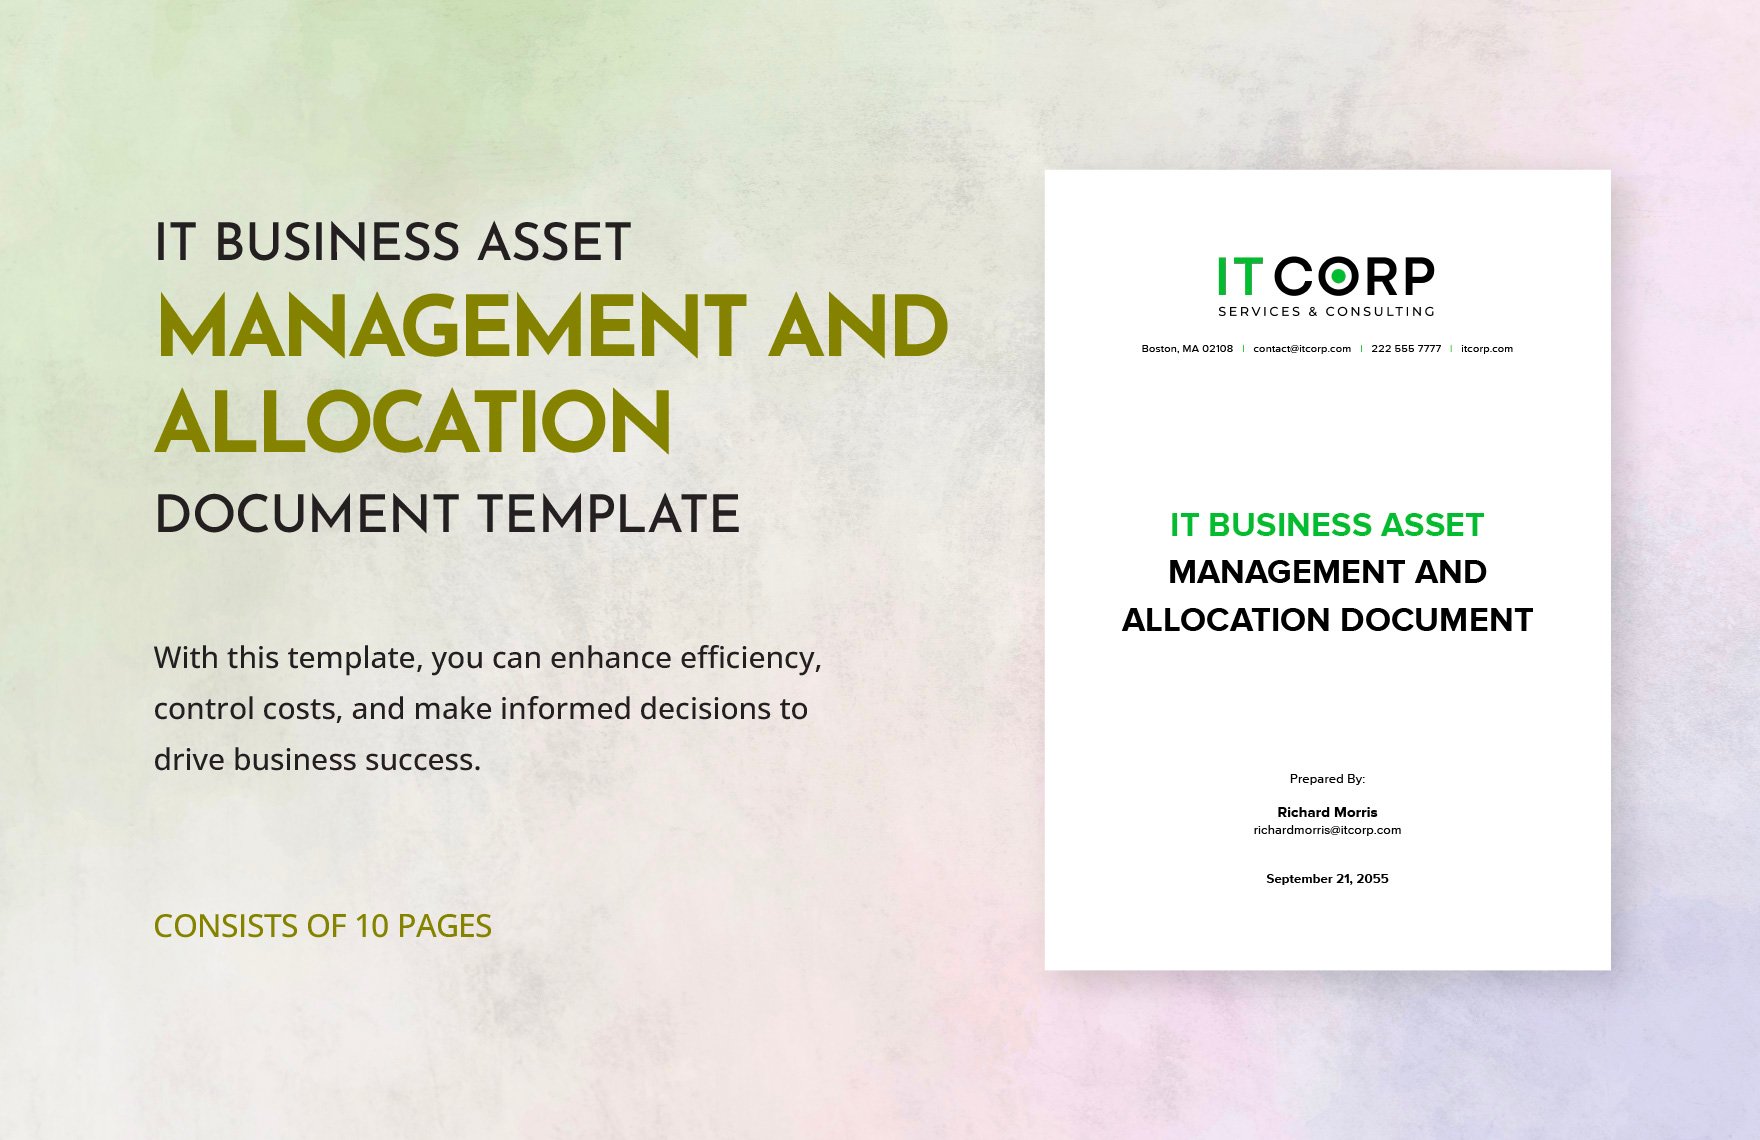 IT Business Asset Management and Allocation Document Template in Word, Google Docs, PDF